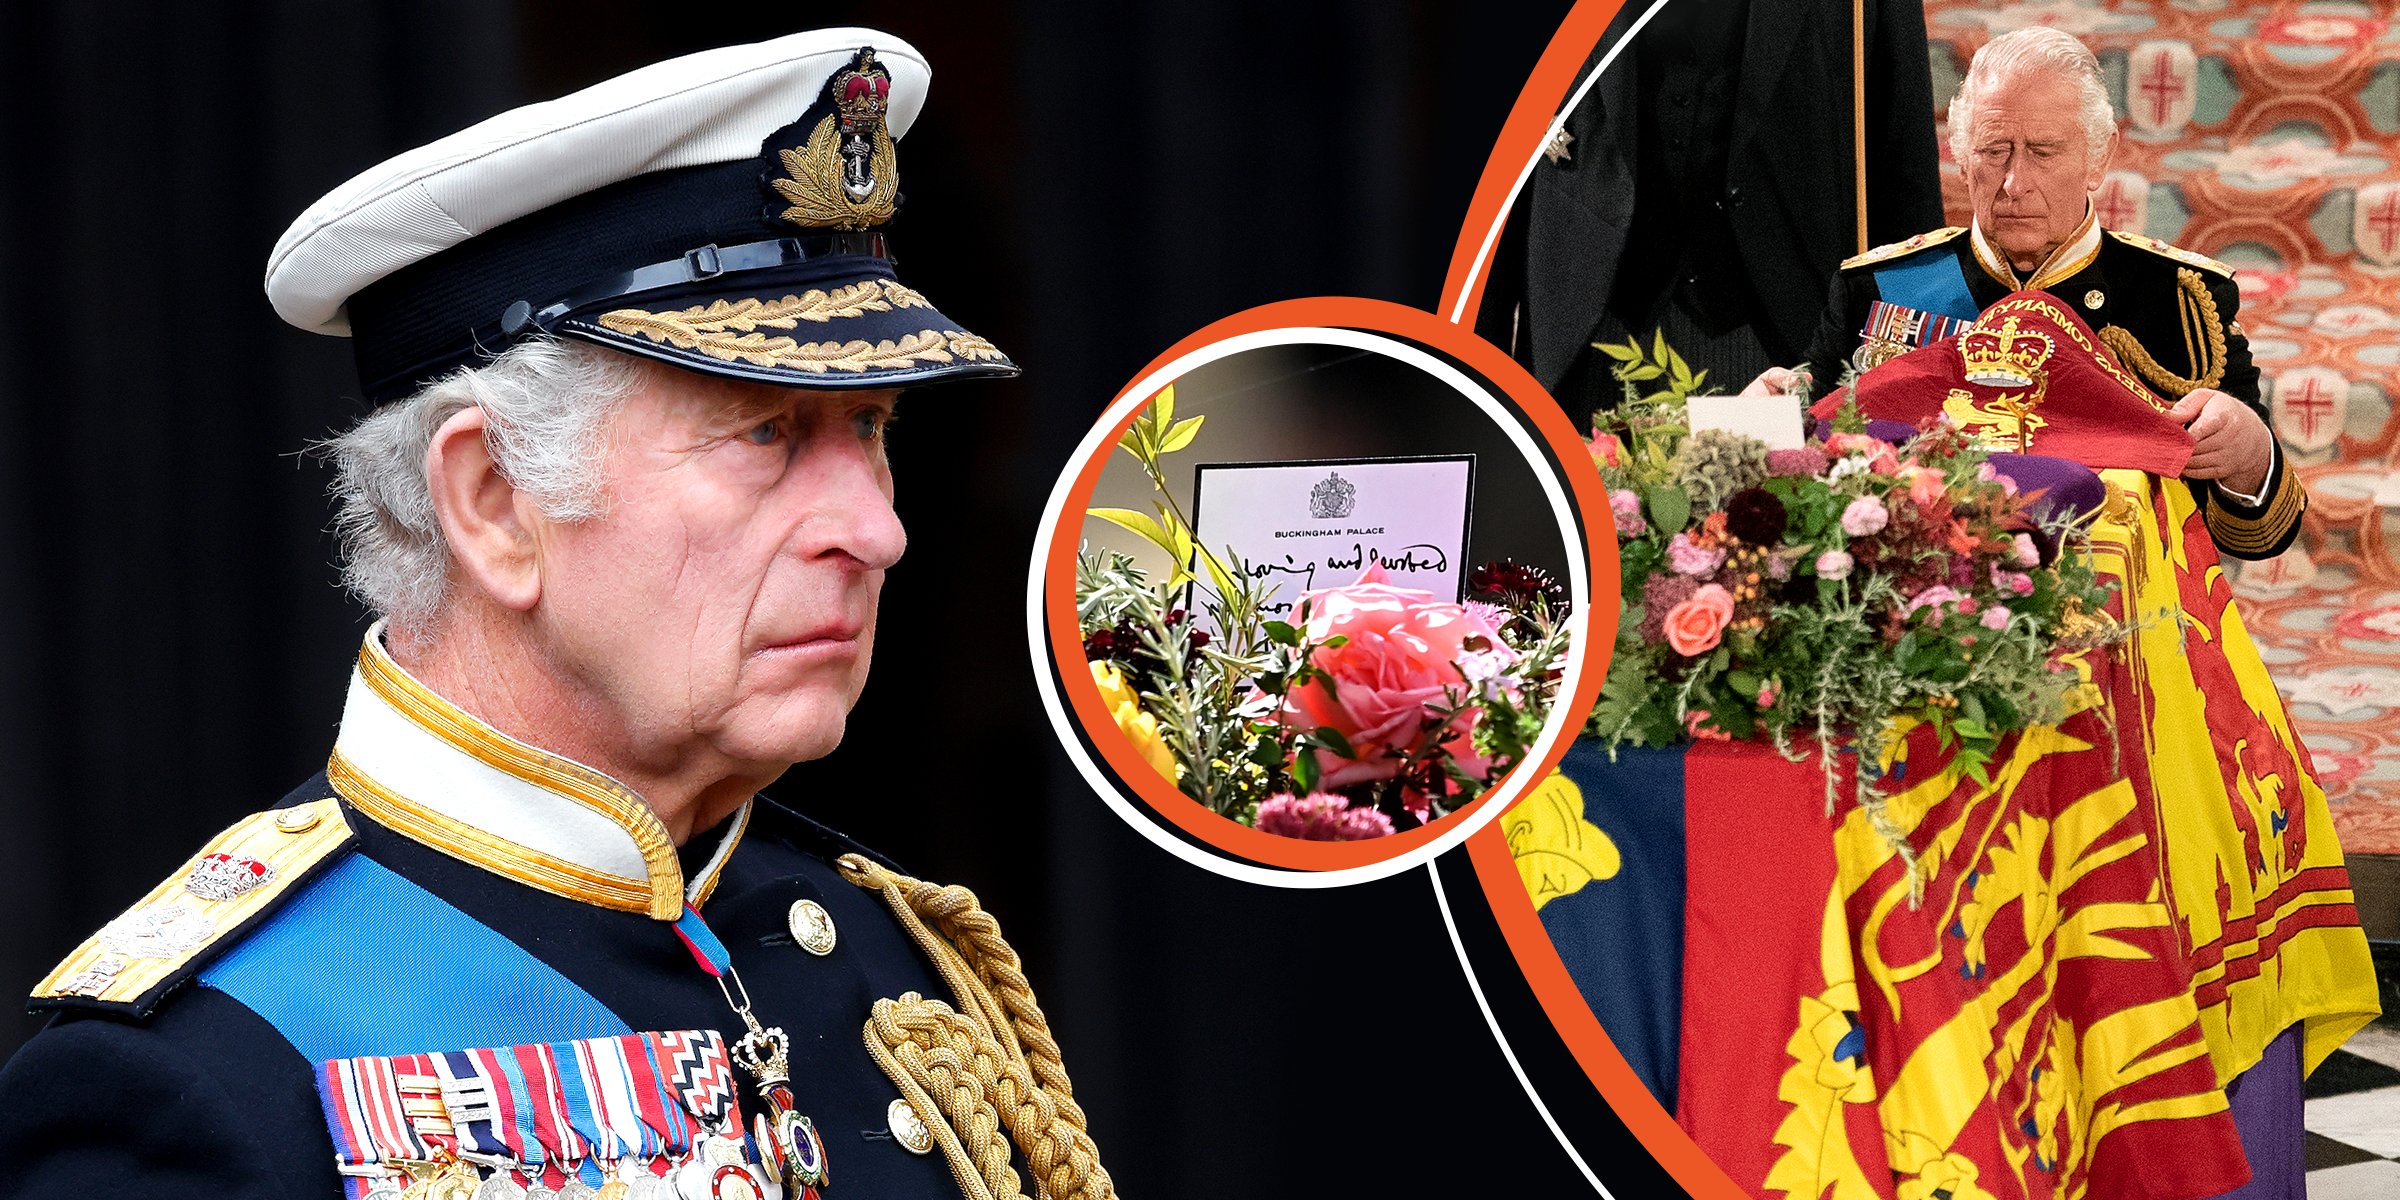 King Charles III | A note from King Charles III to Queen Elizabeth II | King Charles III at Queen Elizabeth II's coffin | Source: Getty Images 